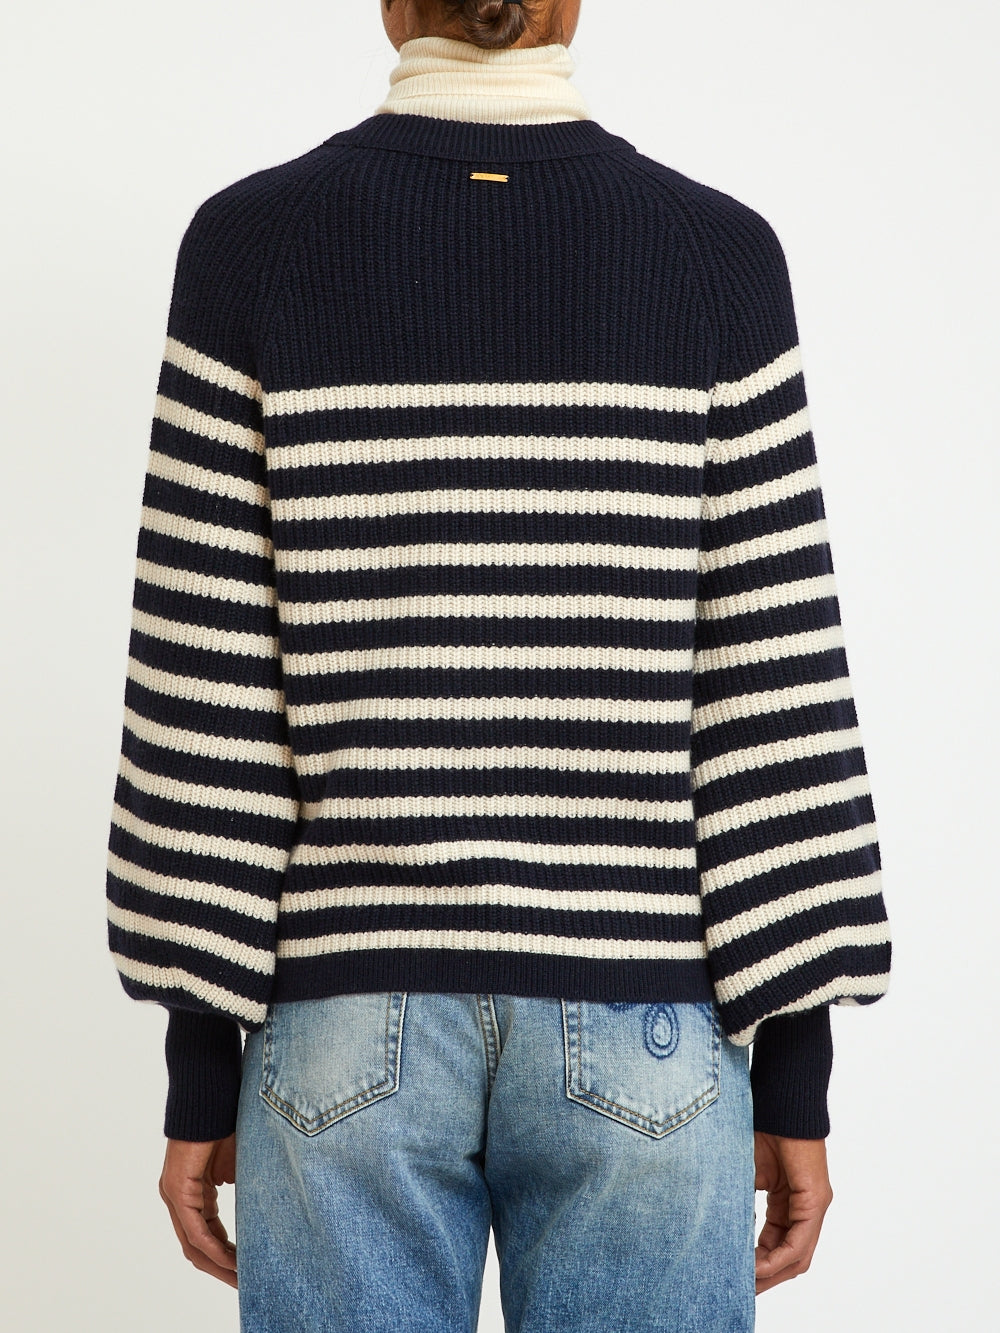 MARLOW CASHMERE SWEATER